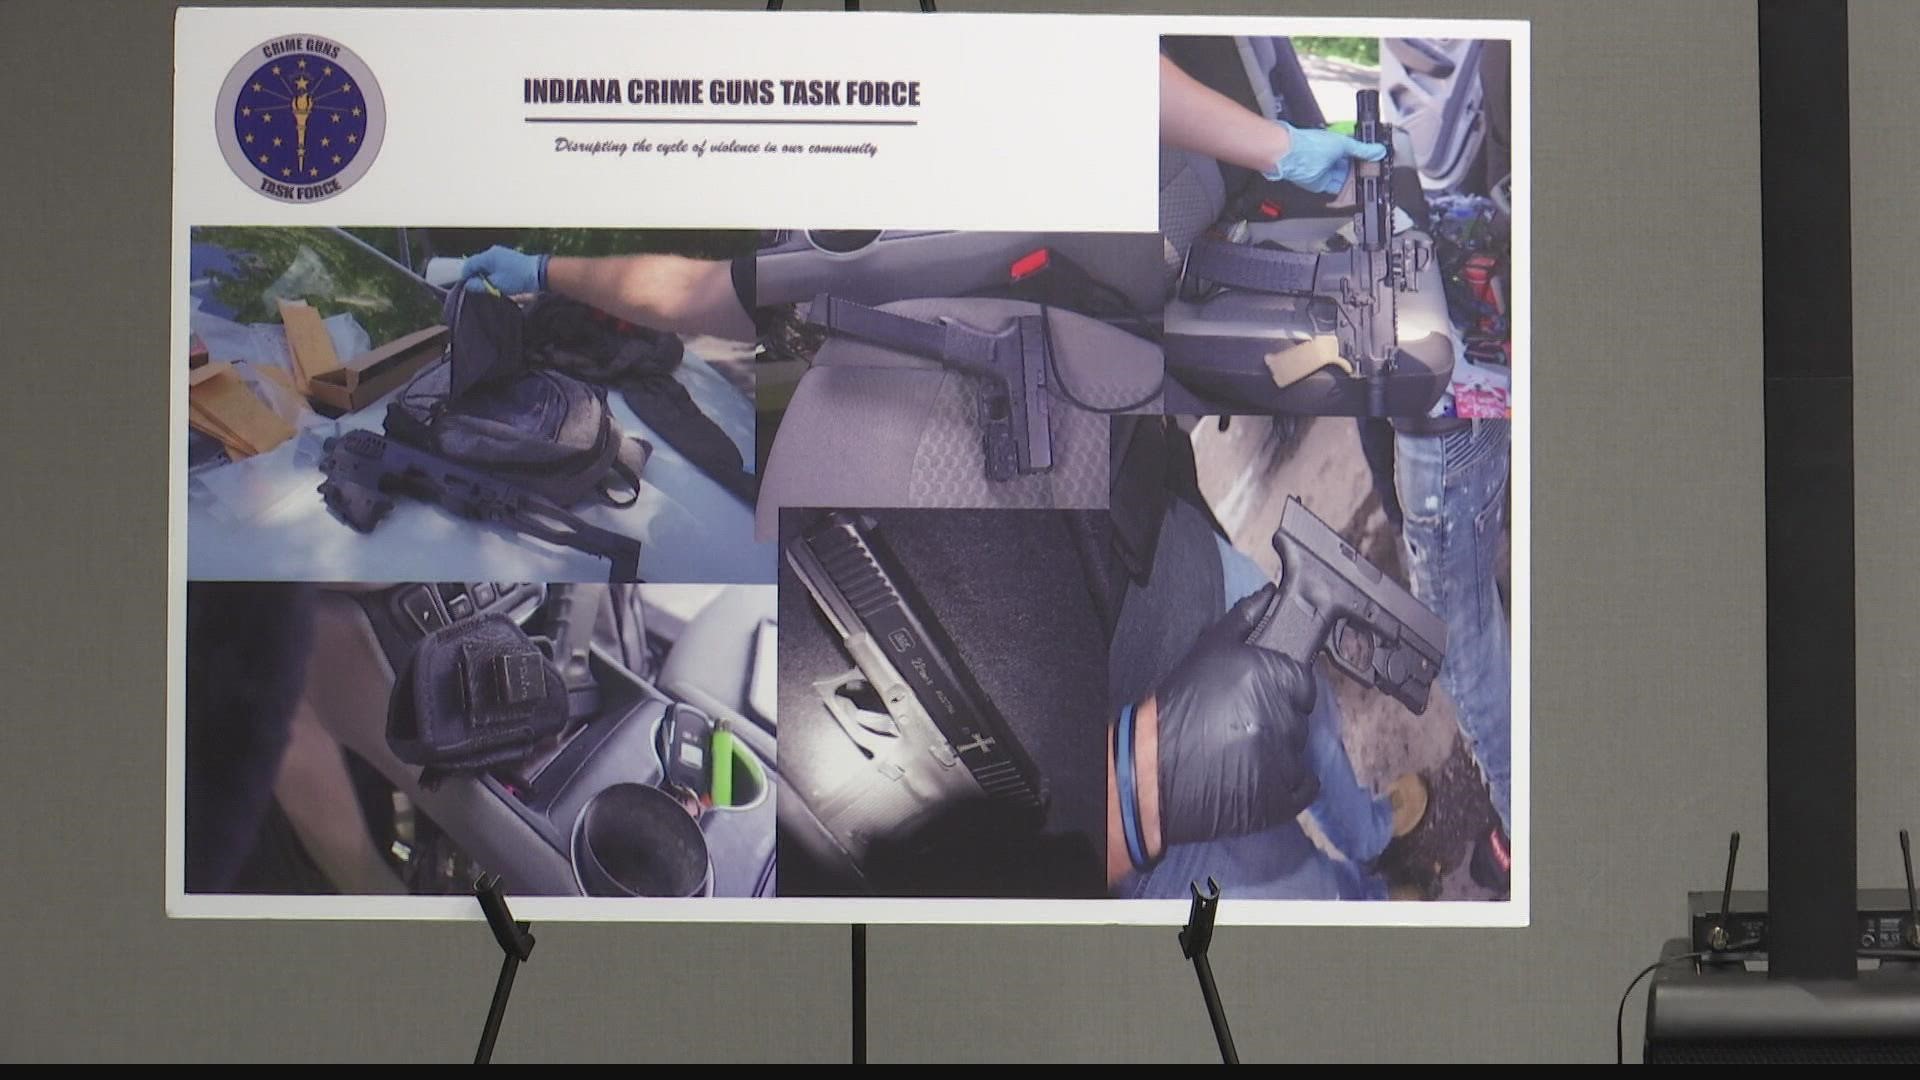 The task force confiscated more than 350 guns used in crimes and arrested nearly 400 people.